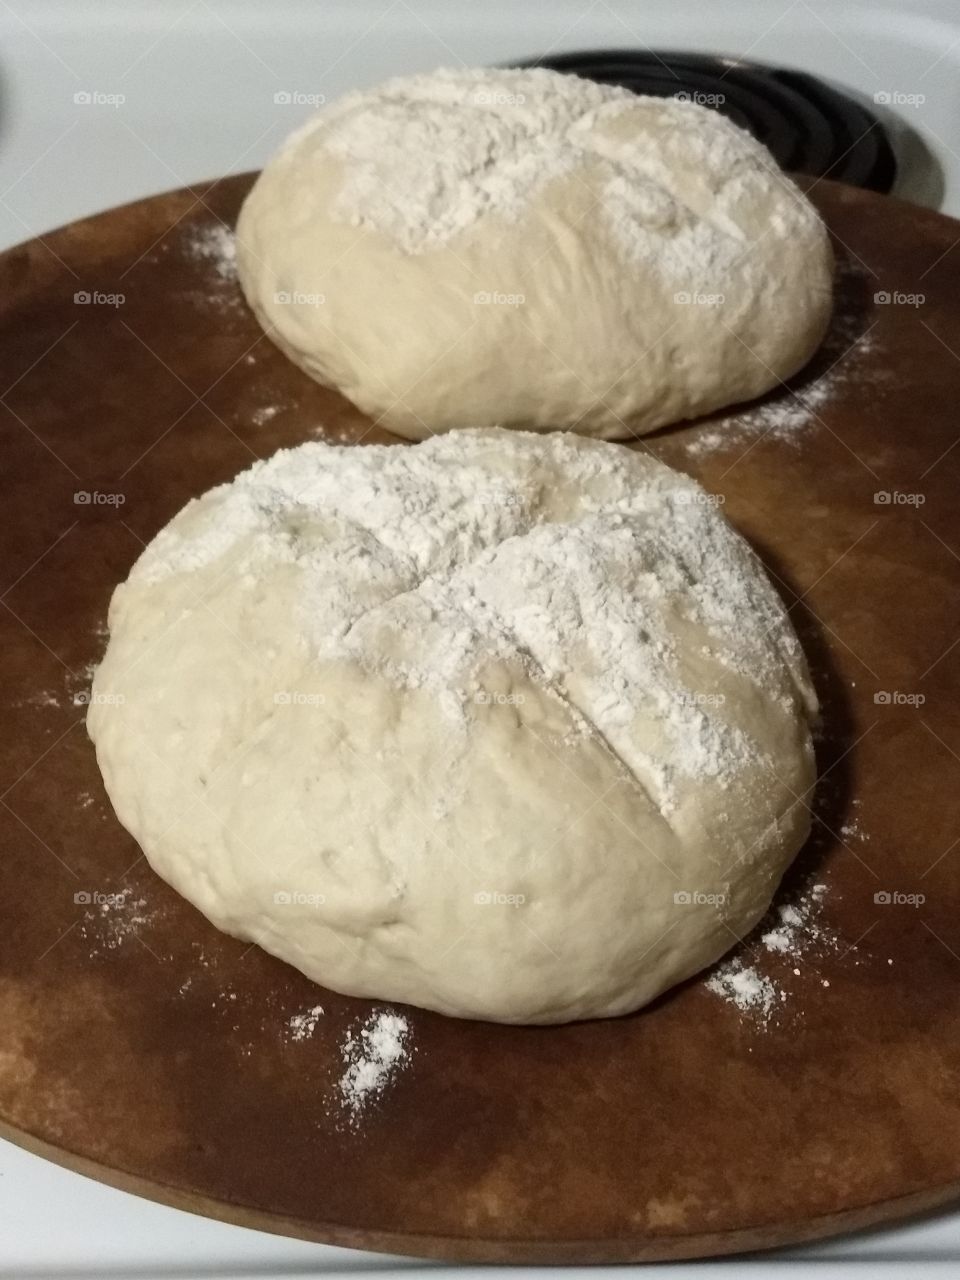 bread dough formed into rustic loaves ready to bake